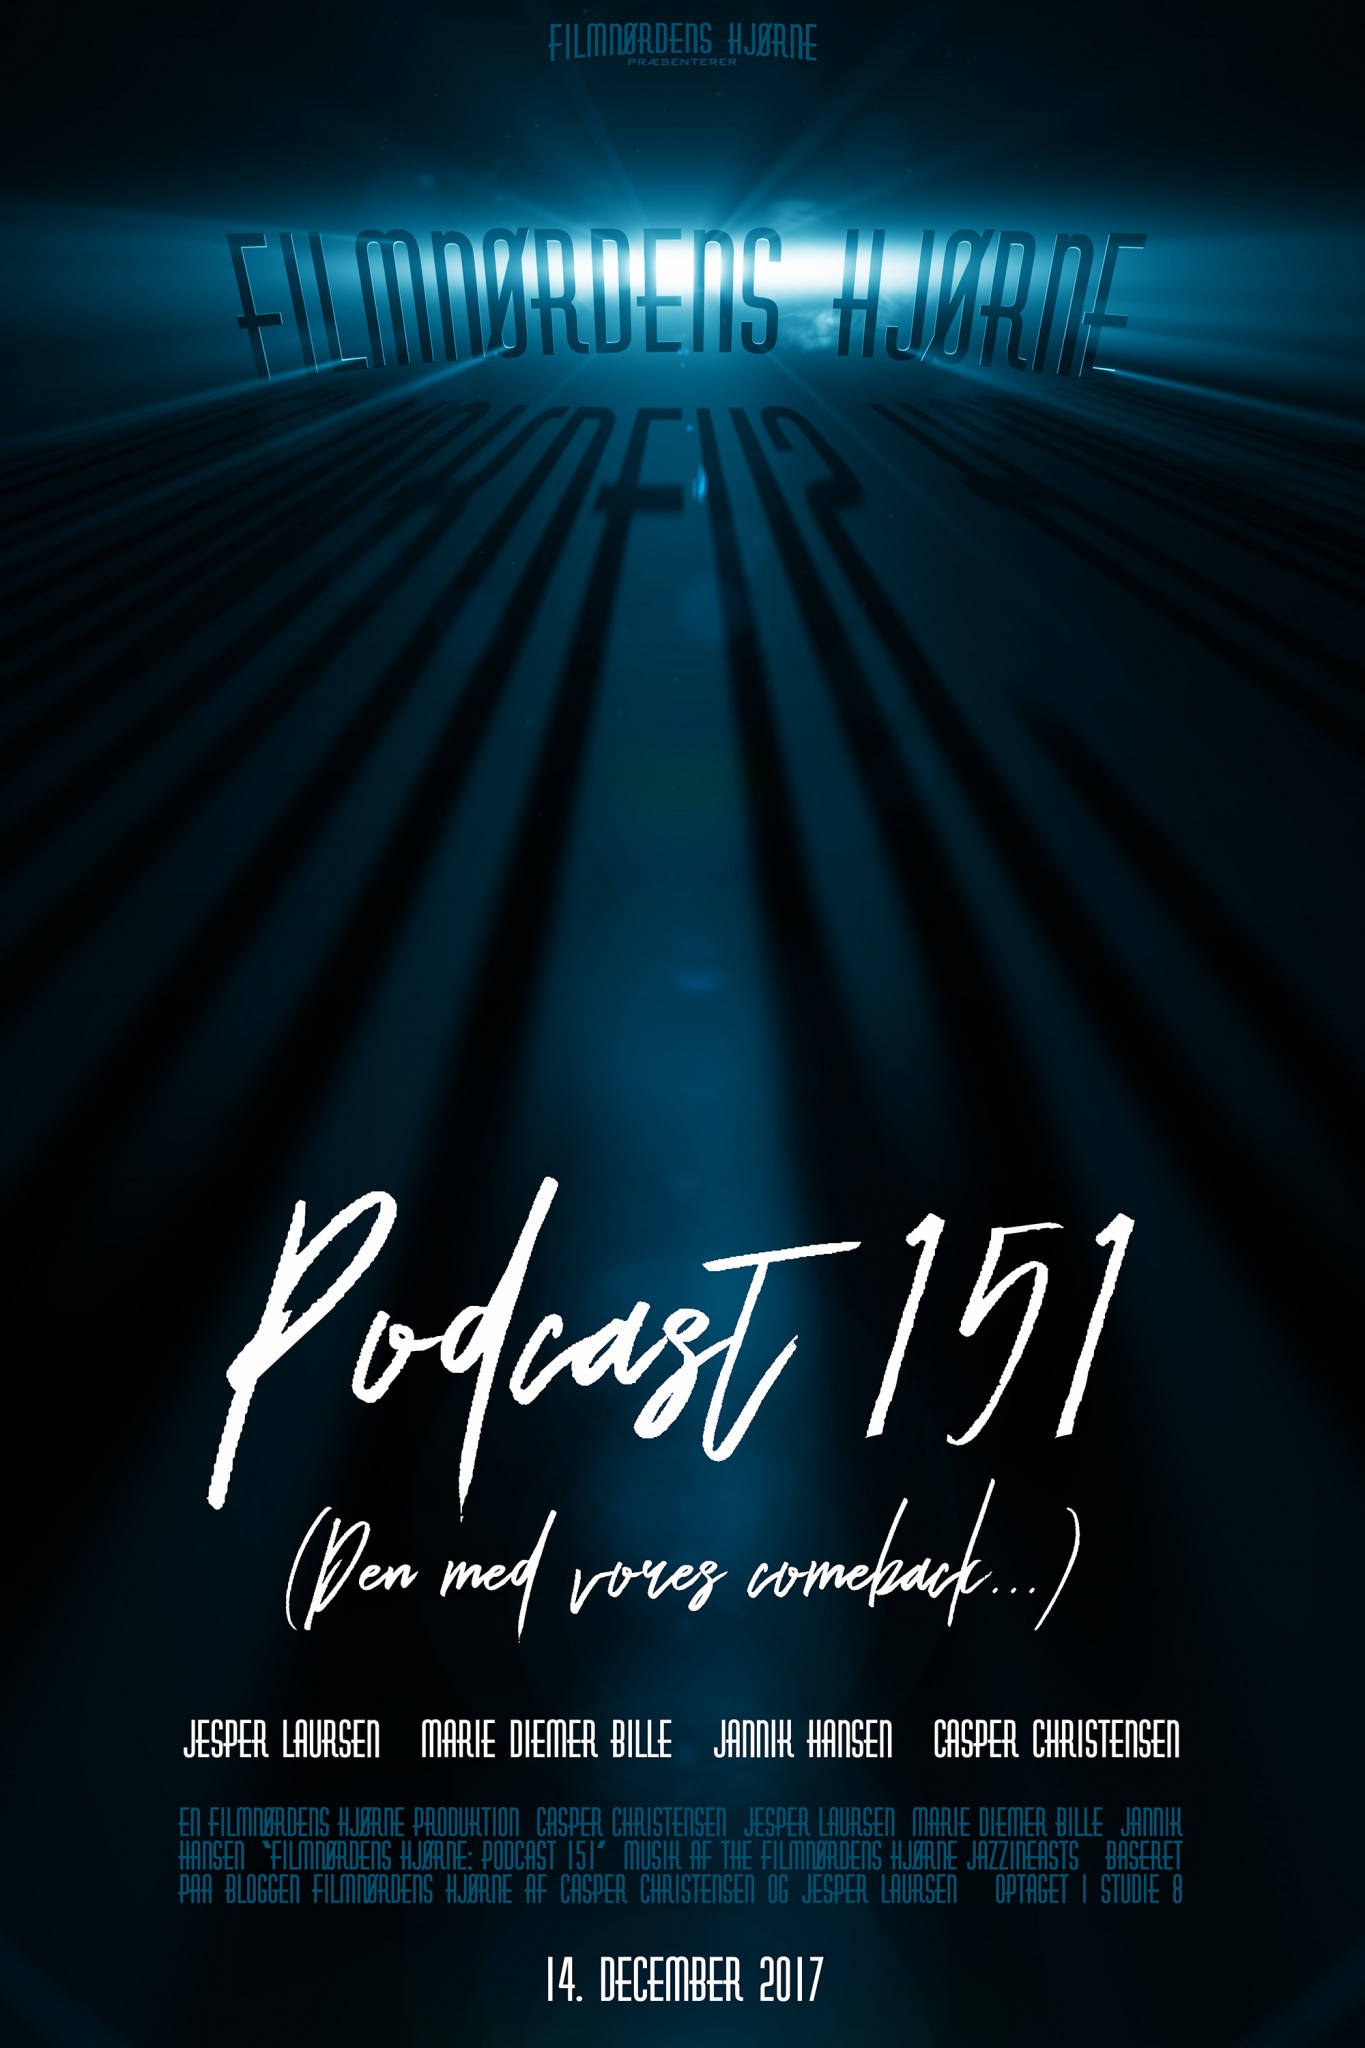 Podcast 151 small